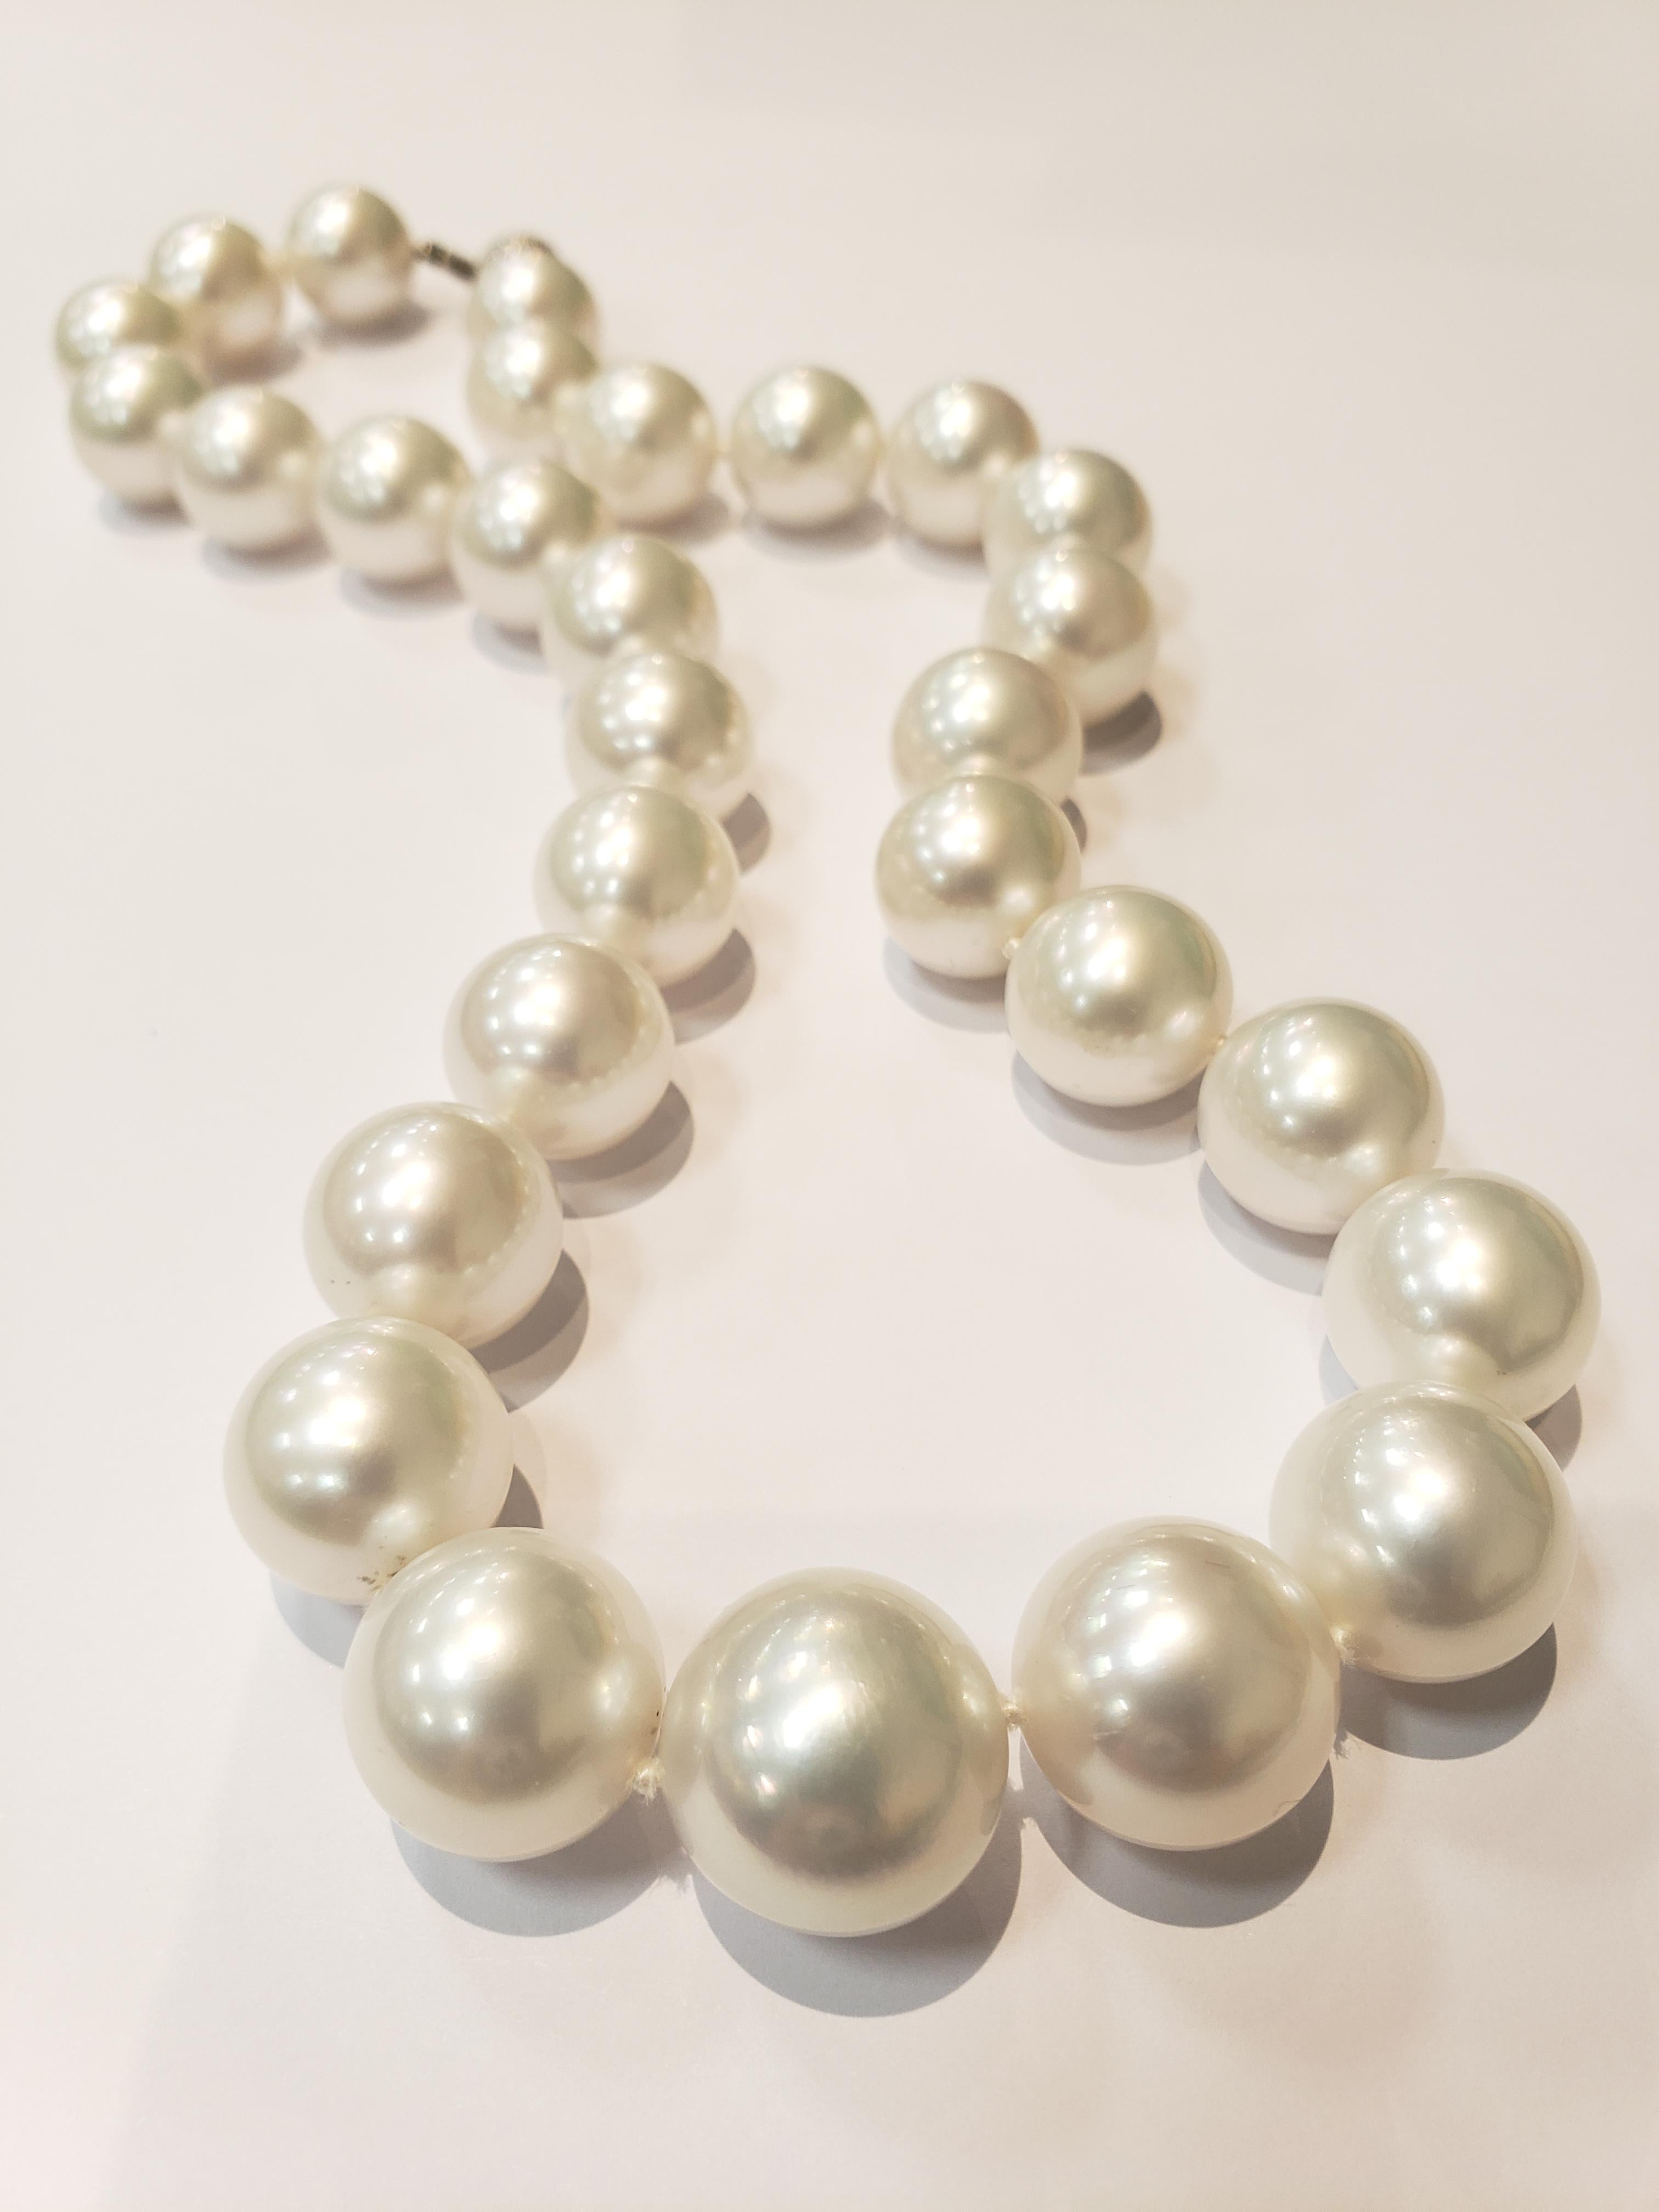 Strand of AAA quality white South Sea pearls graduated from 14.2 - 17 mm. Strand of 29 pearls, with a textured white gold ball clasp. Necklace is 18